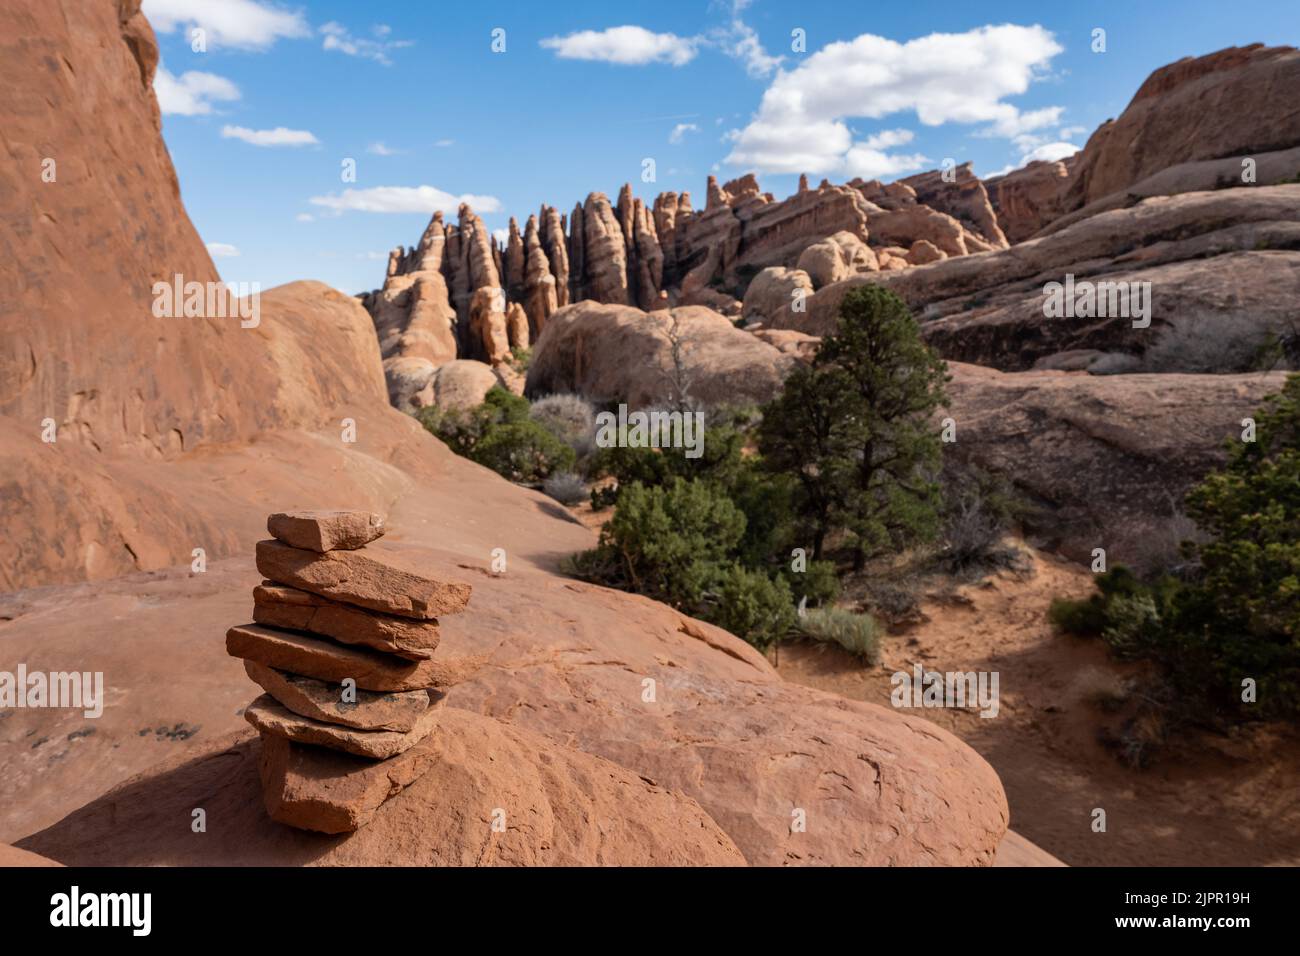 Rock Cairn Marking A Sand Stone Trail In Arches National Park Stock Photo